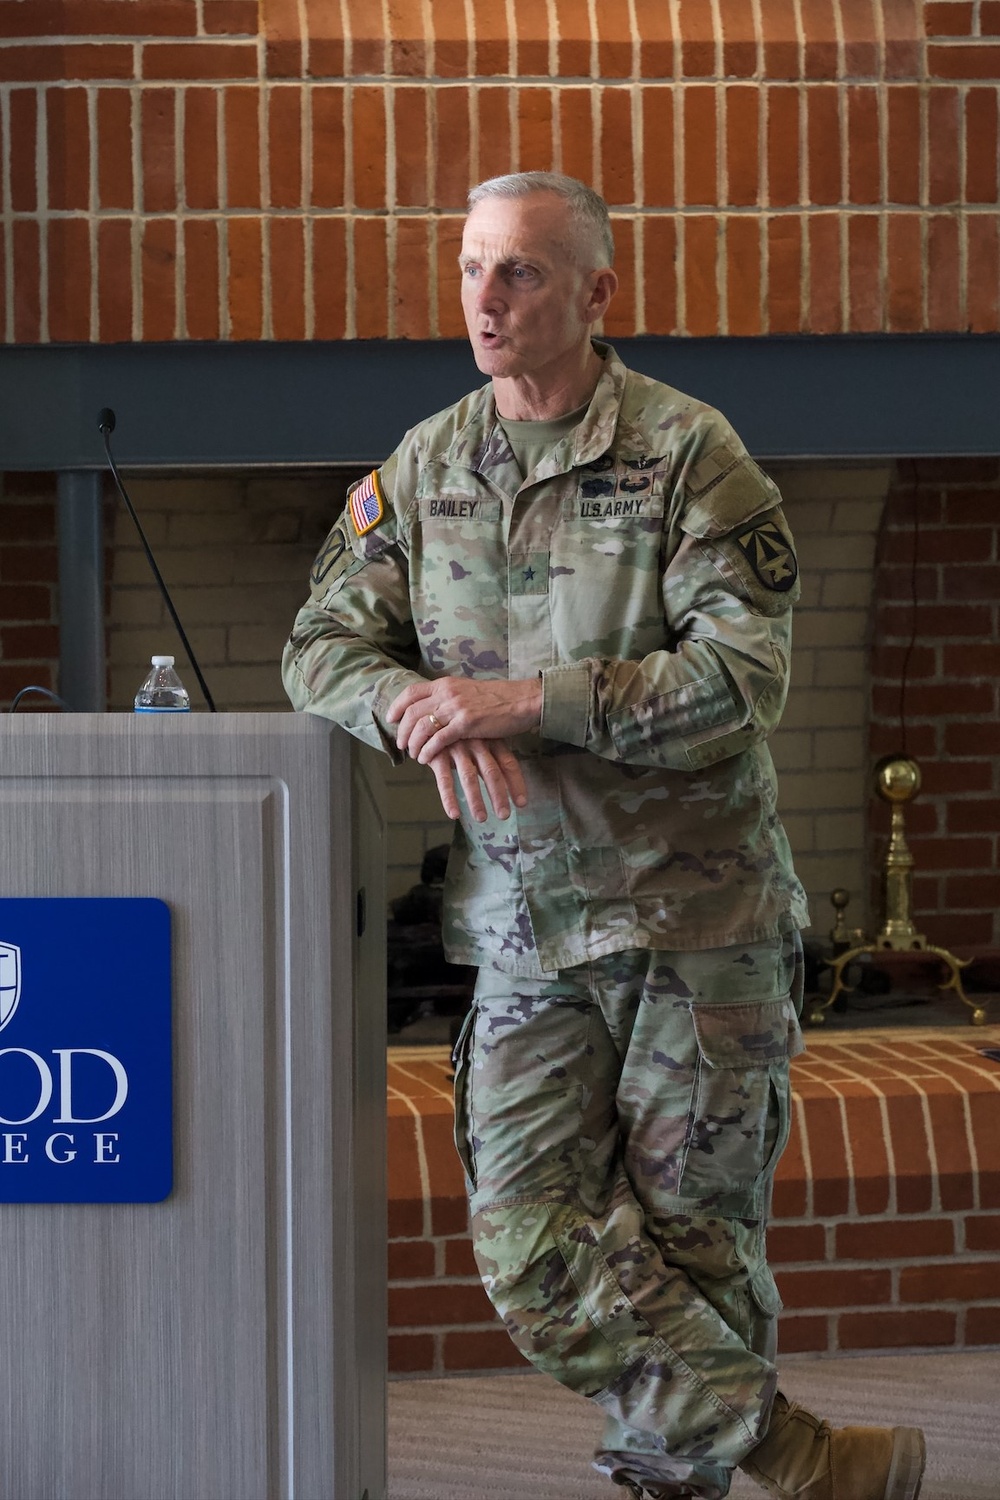 Bailey, Brunell Talk Character with Hood College ROTC Cadets